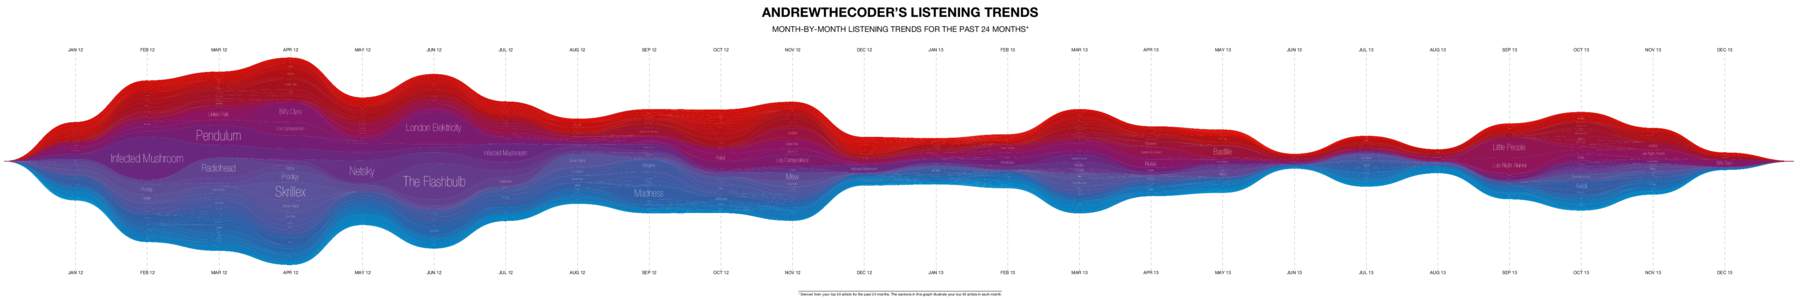 ANDREWTHECODER’S LISTENING TRENDS MONTH-BY-MONTH LISTENING TRENDS FOR THE PAST 24 MONTHS* JAN 12 FEB 12